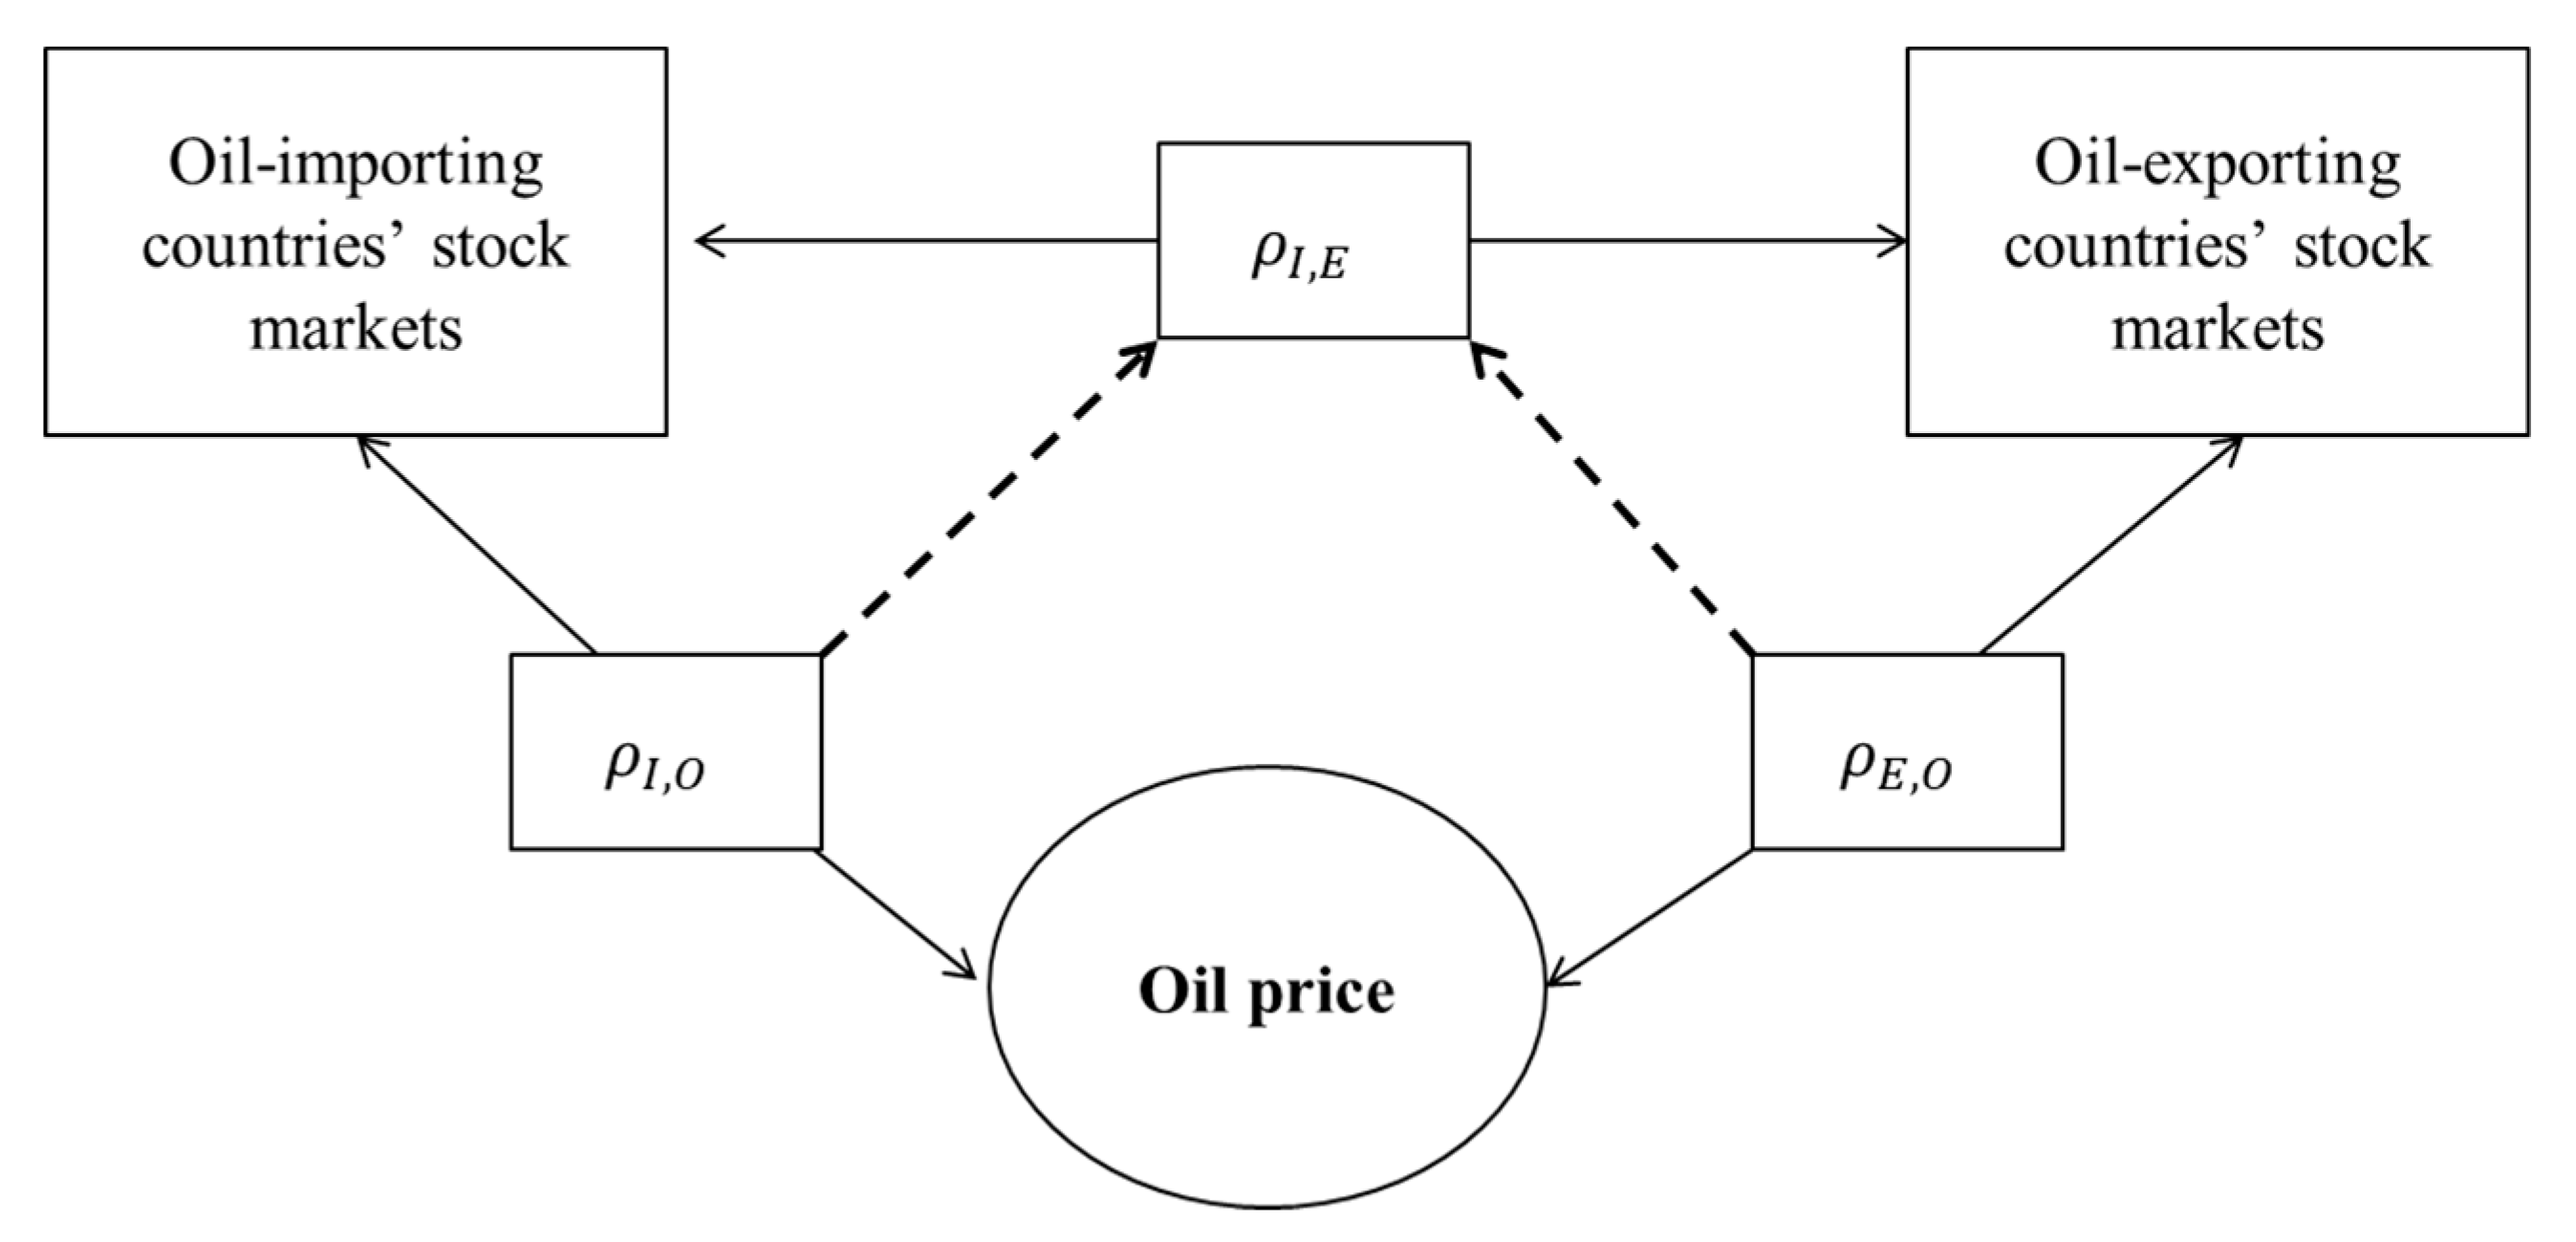 research paper on oil prices